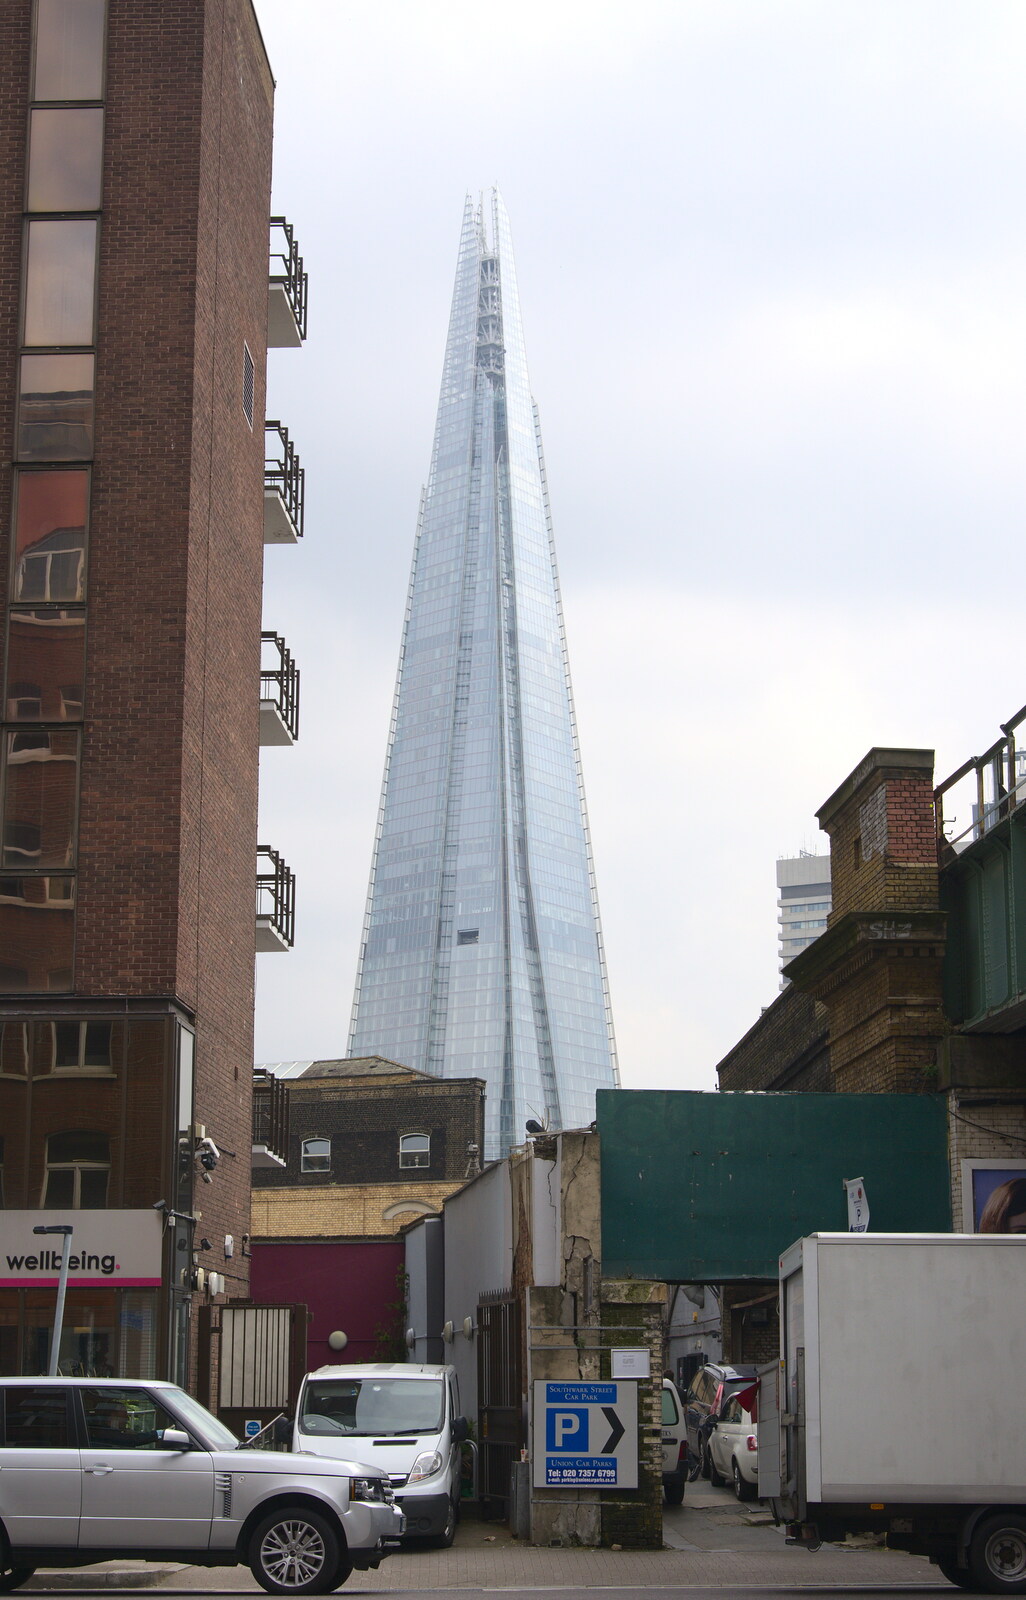 The Shard from Brantham Dereliction, and a SwiftKey Photoshoot, Suffolk and Southwark - 29th April 2014